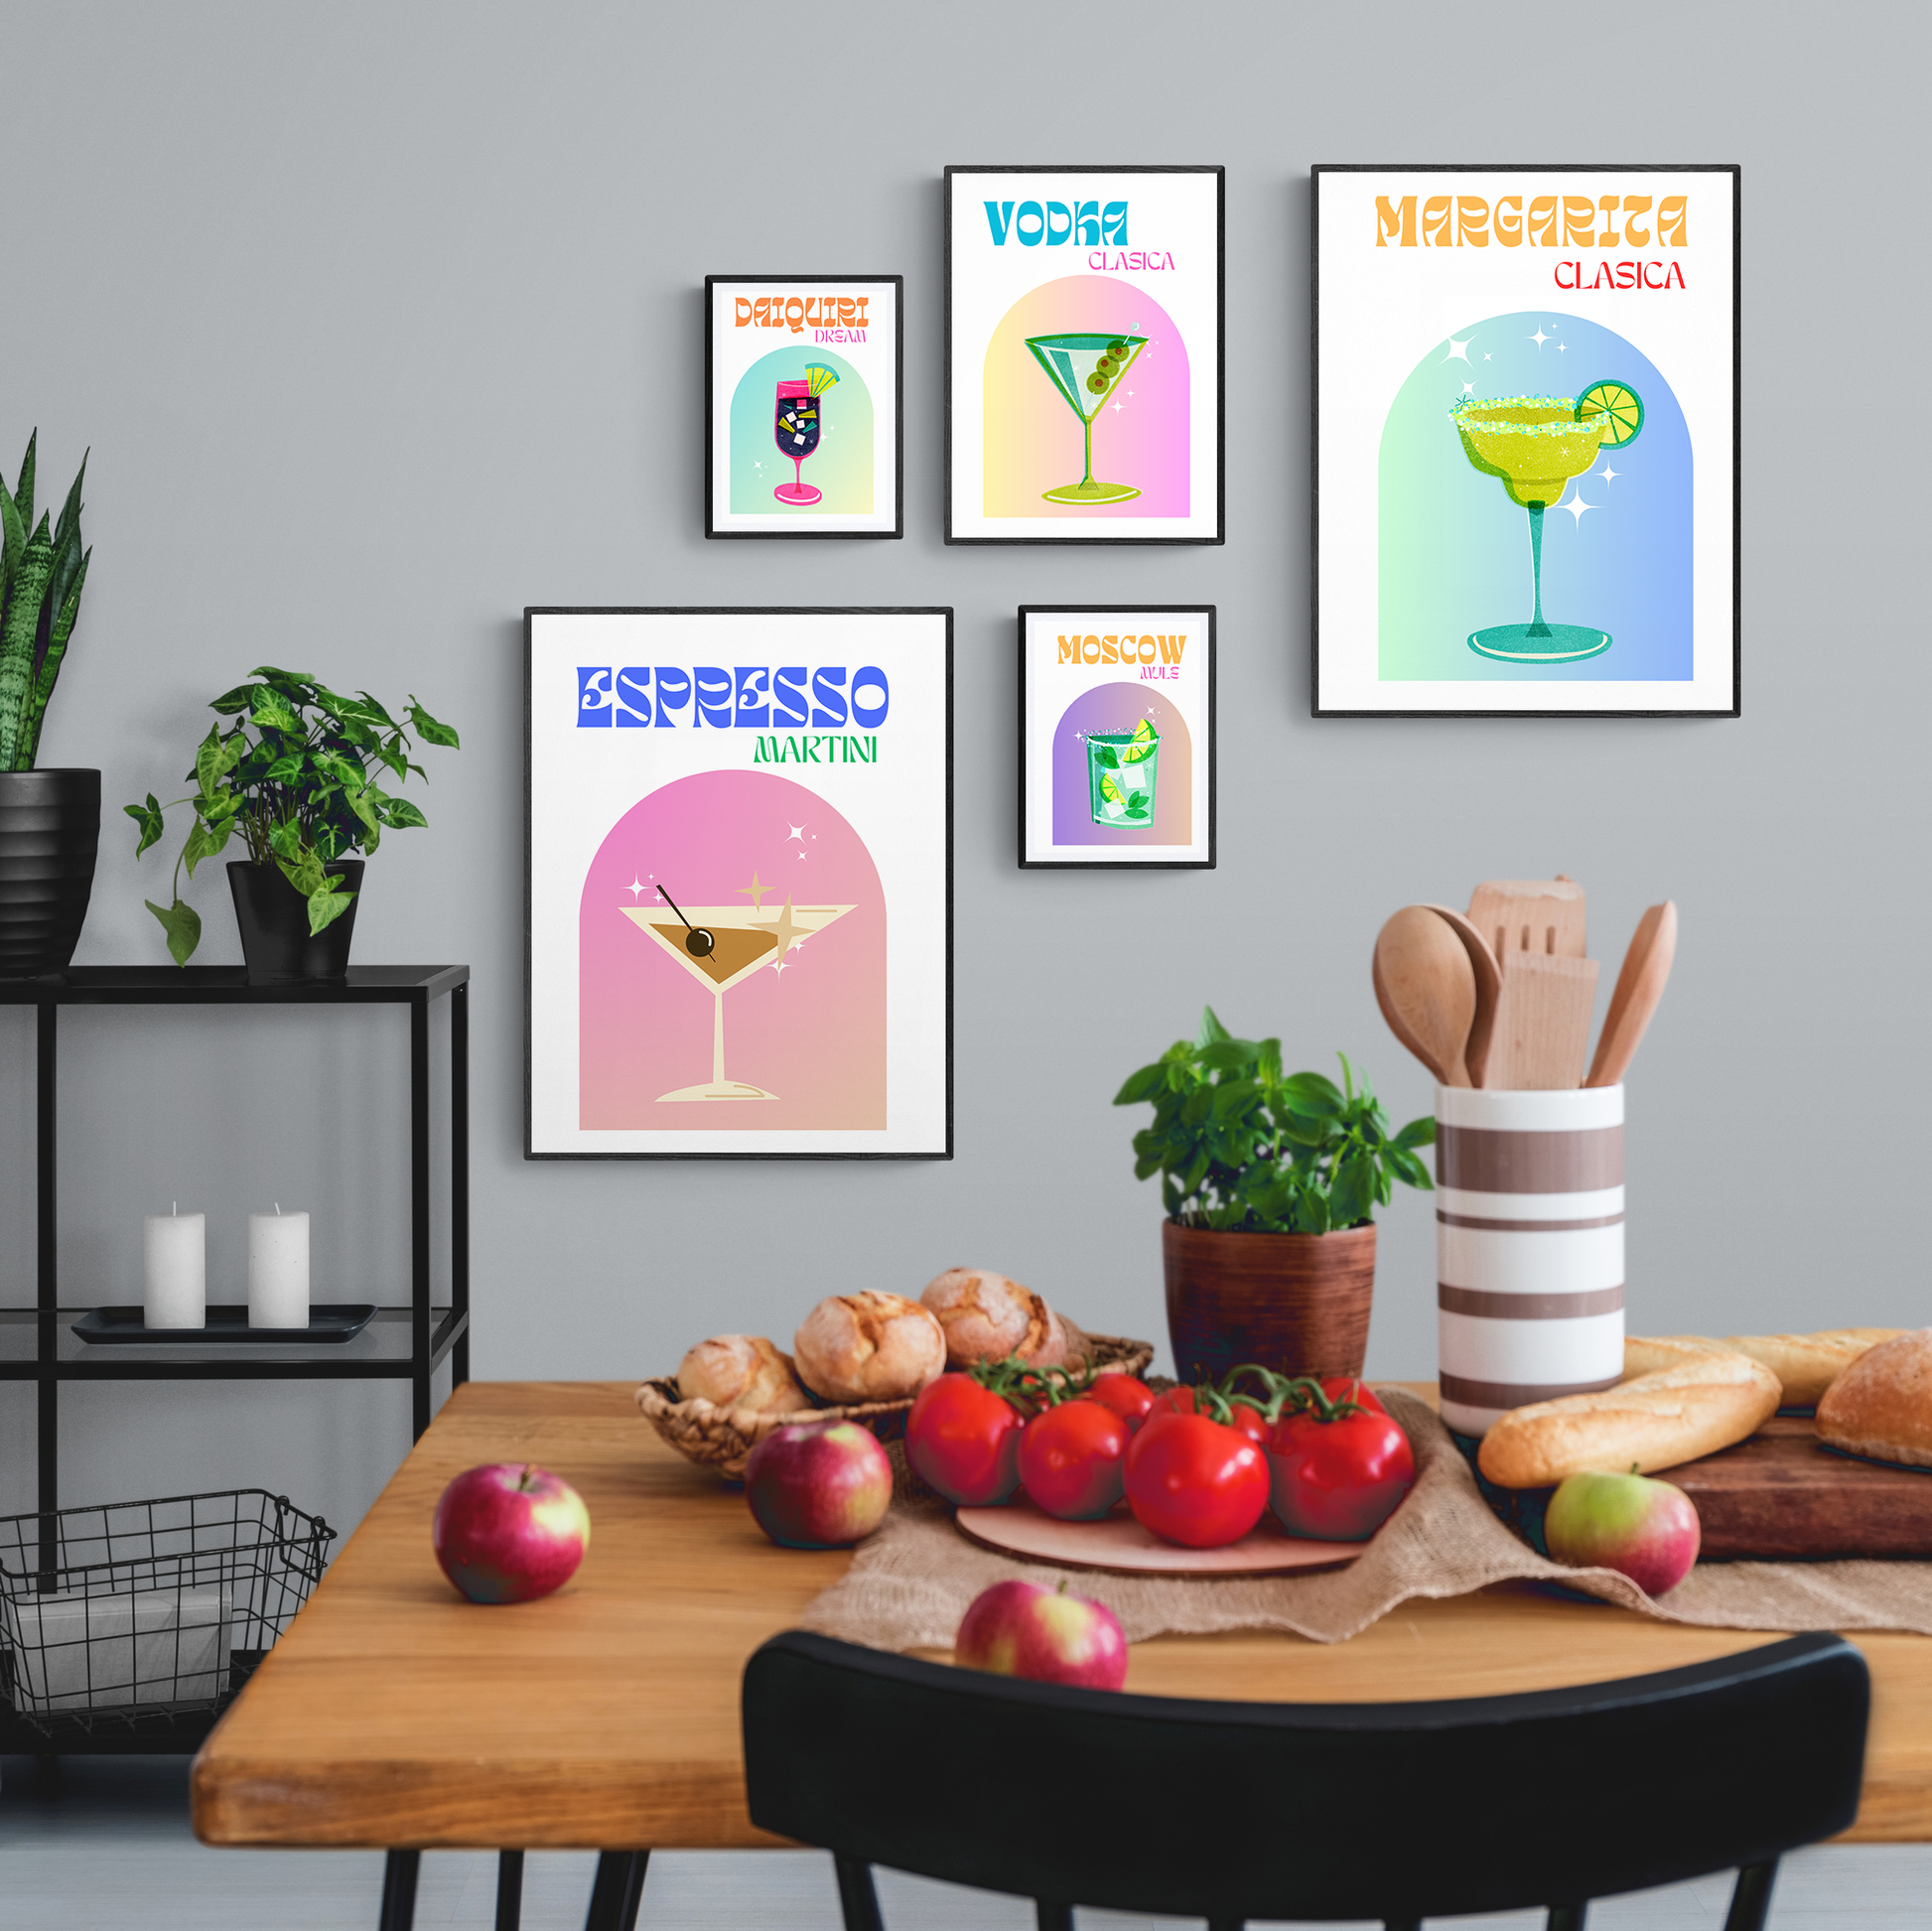 Sip on a bit of nostalgia with this BLOODY MARY COCKTAIL PRINT. Chock full of cocktail recipes, popular subject matter, and inspired art, this poster-turned-wall art is perfect for adding a splash of Boho flavor to any wall - from the nursery to the bar cart. Enjoy a colorful mix of Retro vibes with a modern twist from the comfort of your own kitchen wall. Cheers!